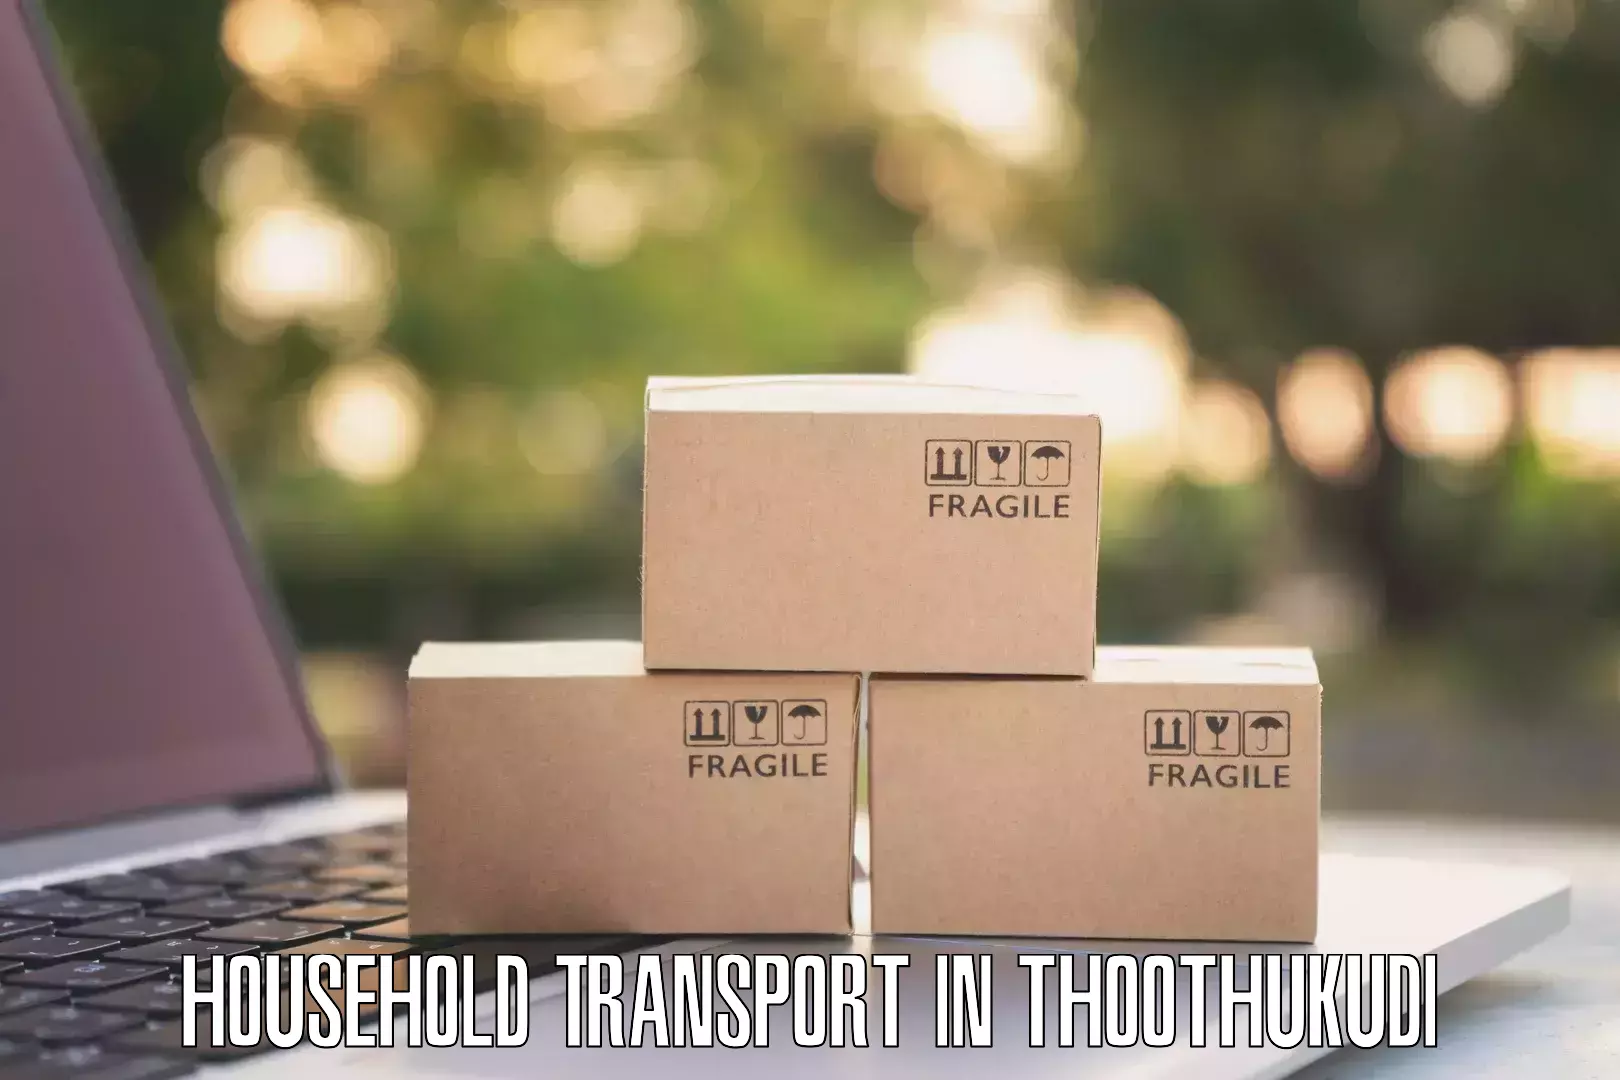 Quality relocation services in Thoothukudi